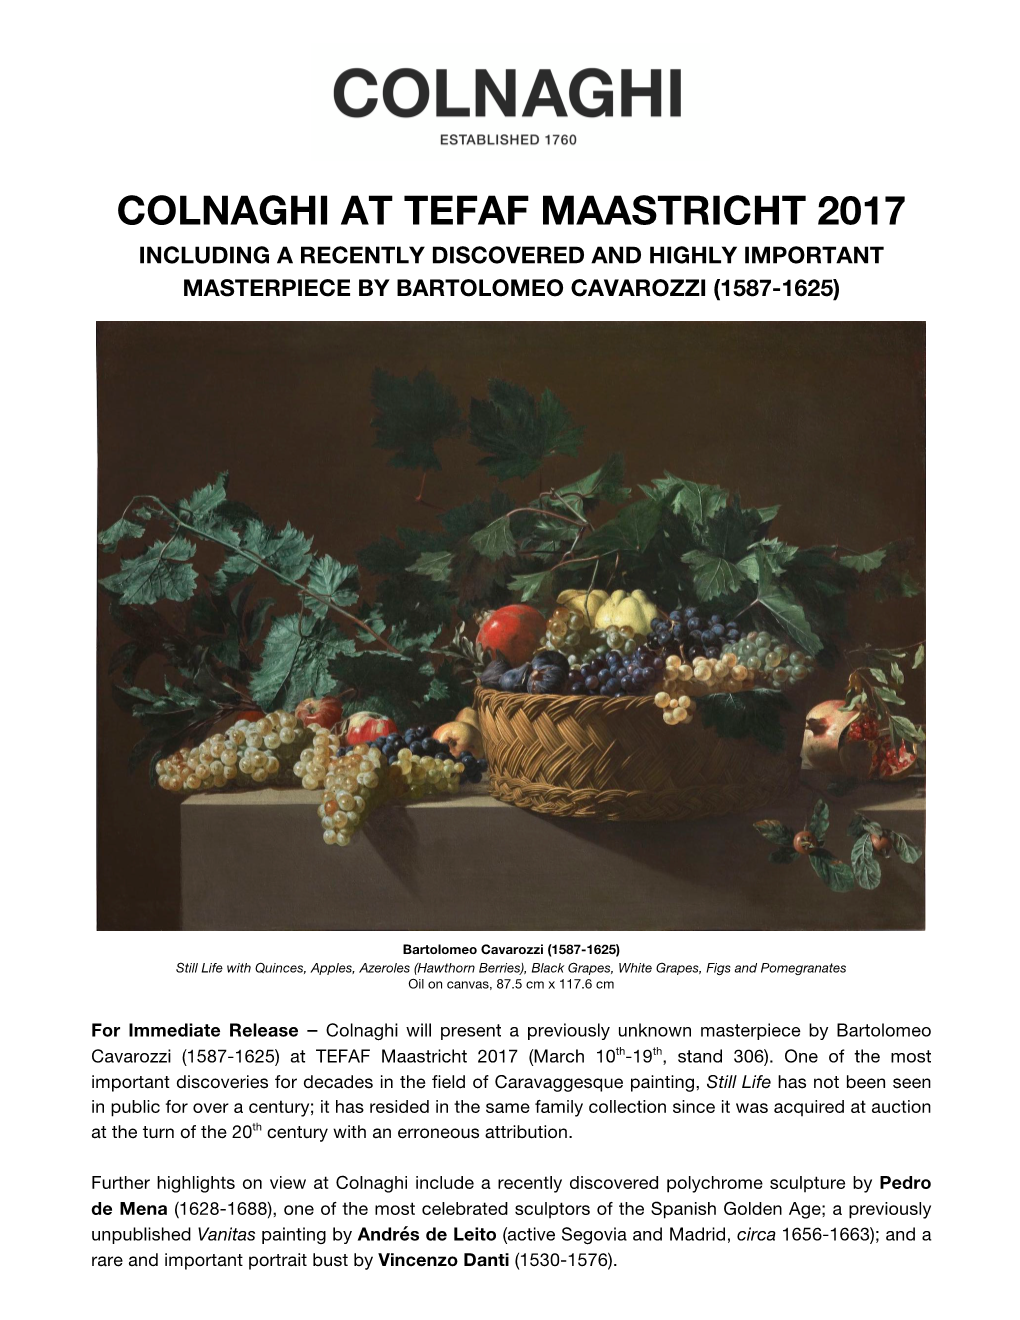 Colnaghi at Tefaf Maastricht 2017 Including a Recently Discovered and Highly Important Masterpiece by Bartolomeo Cavarozzi (1587-1625)